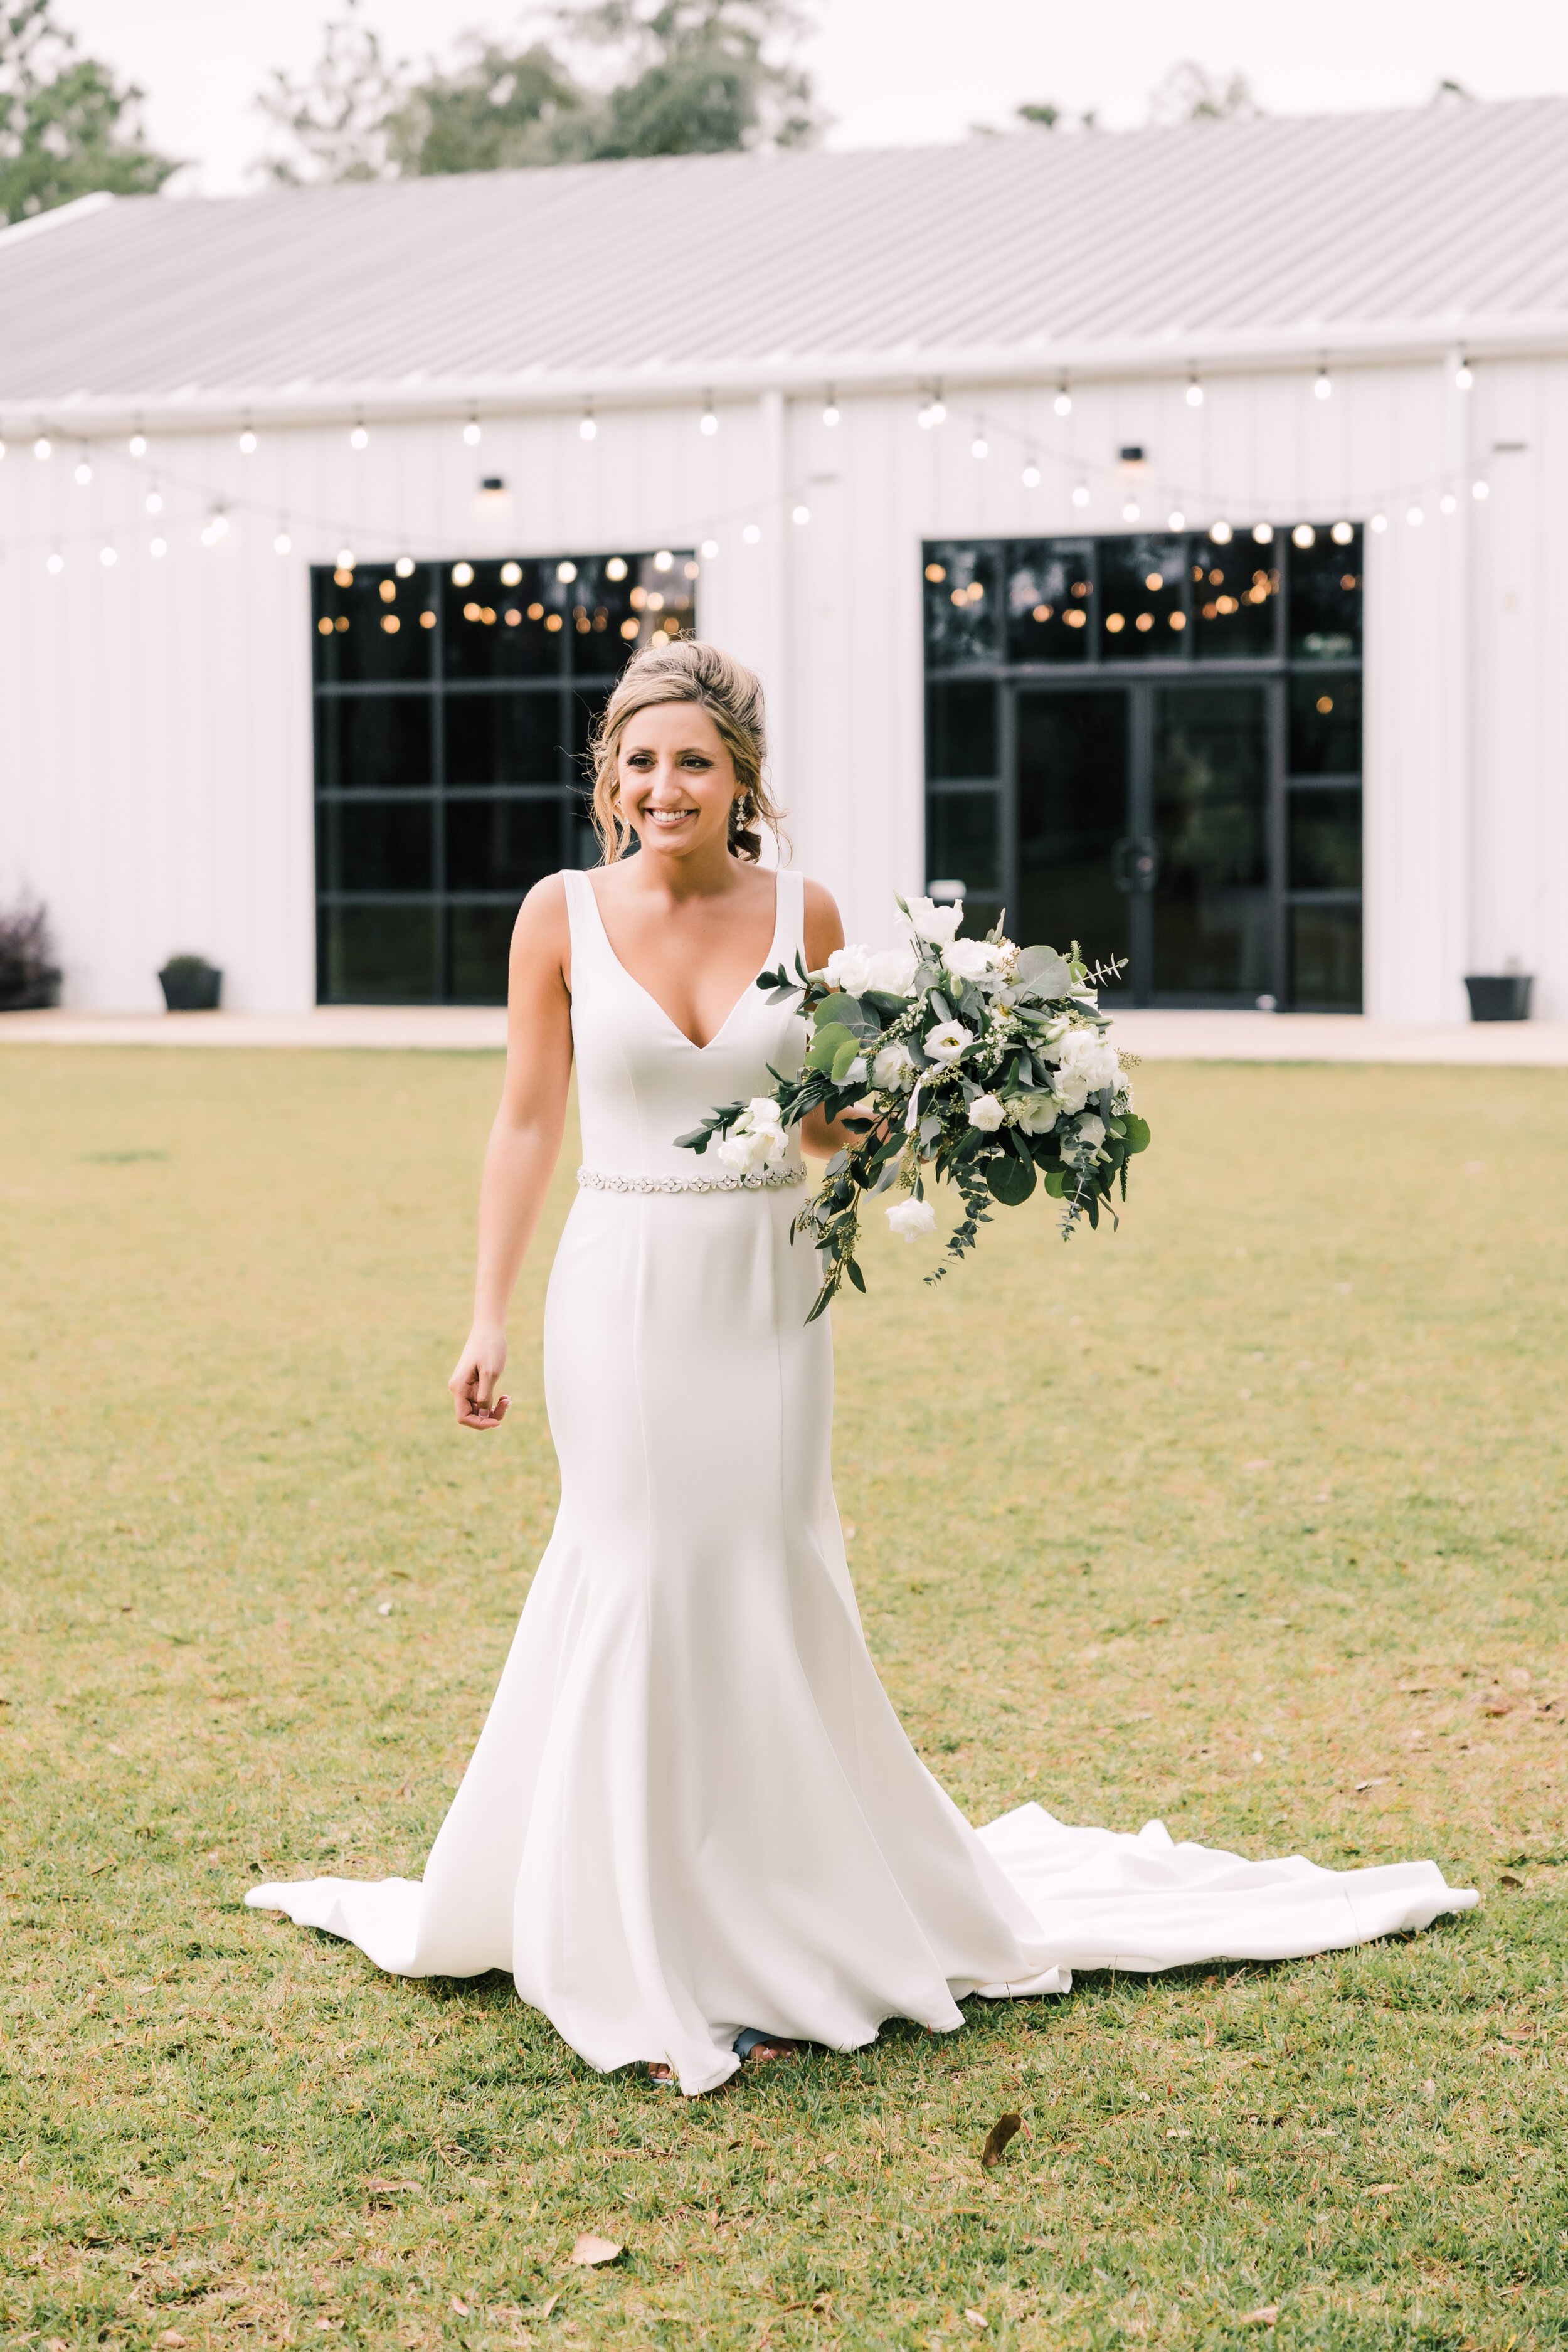 ivory-and-beau-blog-bridal-blog-wedding-blog-real-bride-wedding-dress-down-for-the-gown-bailey-bridal-gown-wedding-gown-crepe-wedding-dress-harper-by-made-with-love-bridal_V4A0452-Edit.jpg